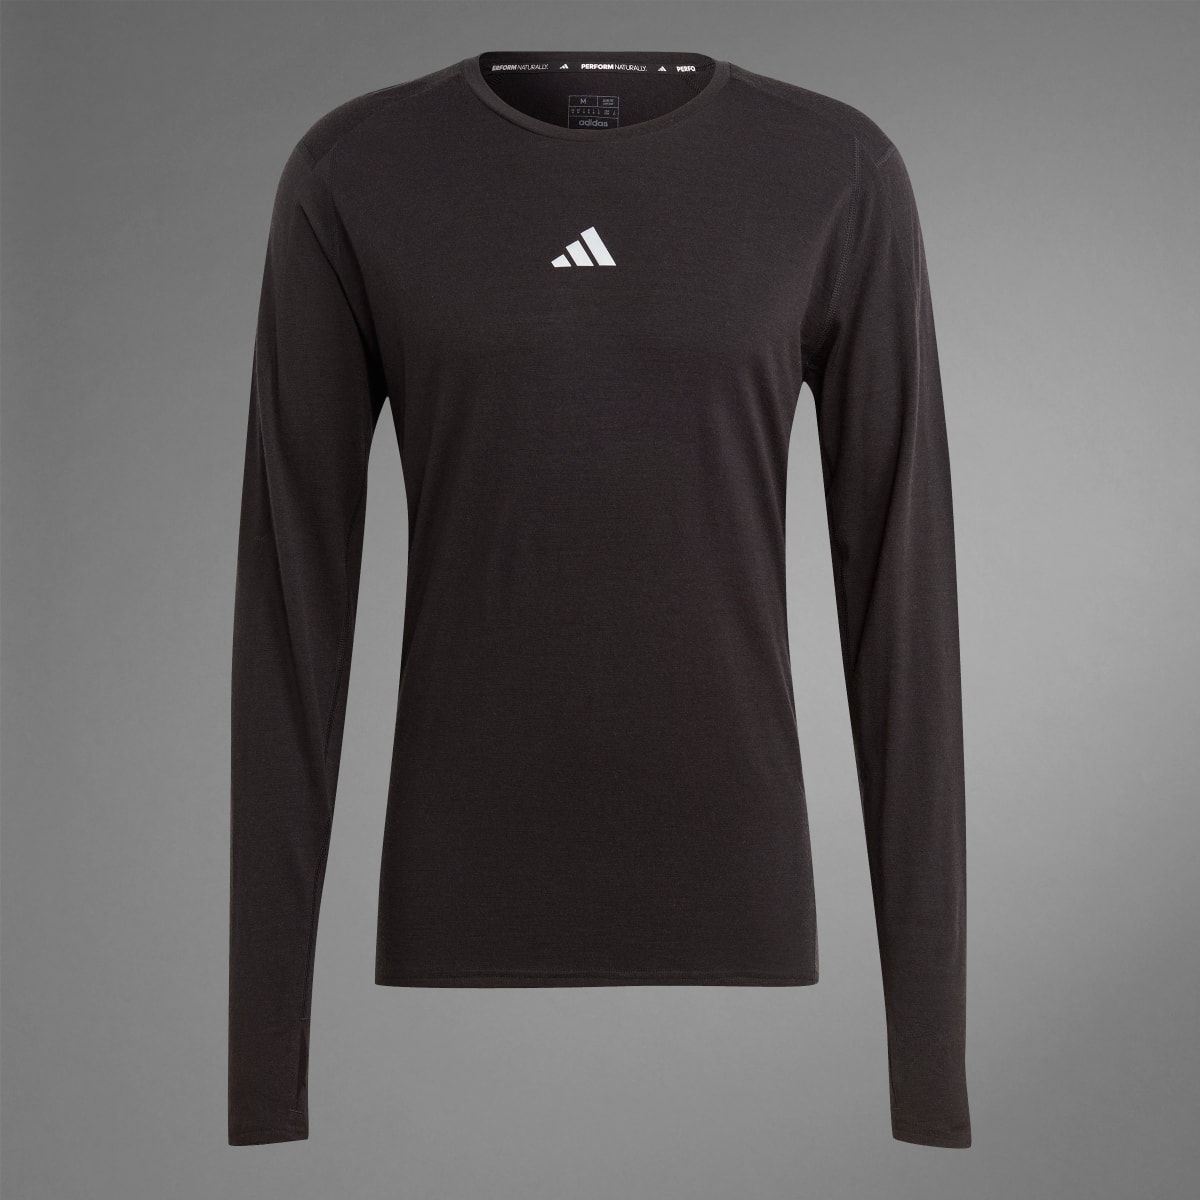 Adidas T-shirt de running manches longues mérinos Ultimate Conquer the Elements. 9